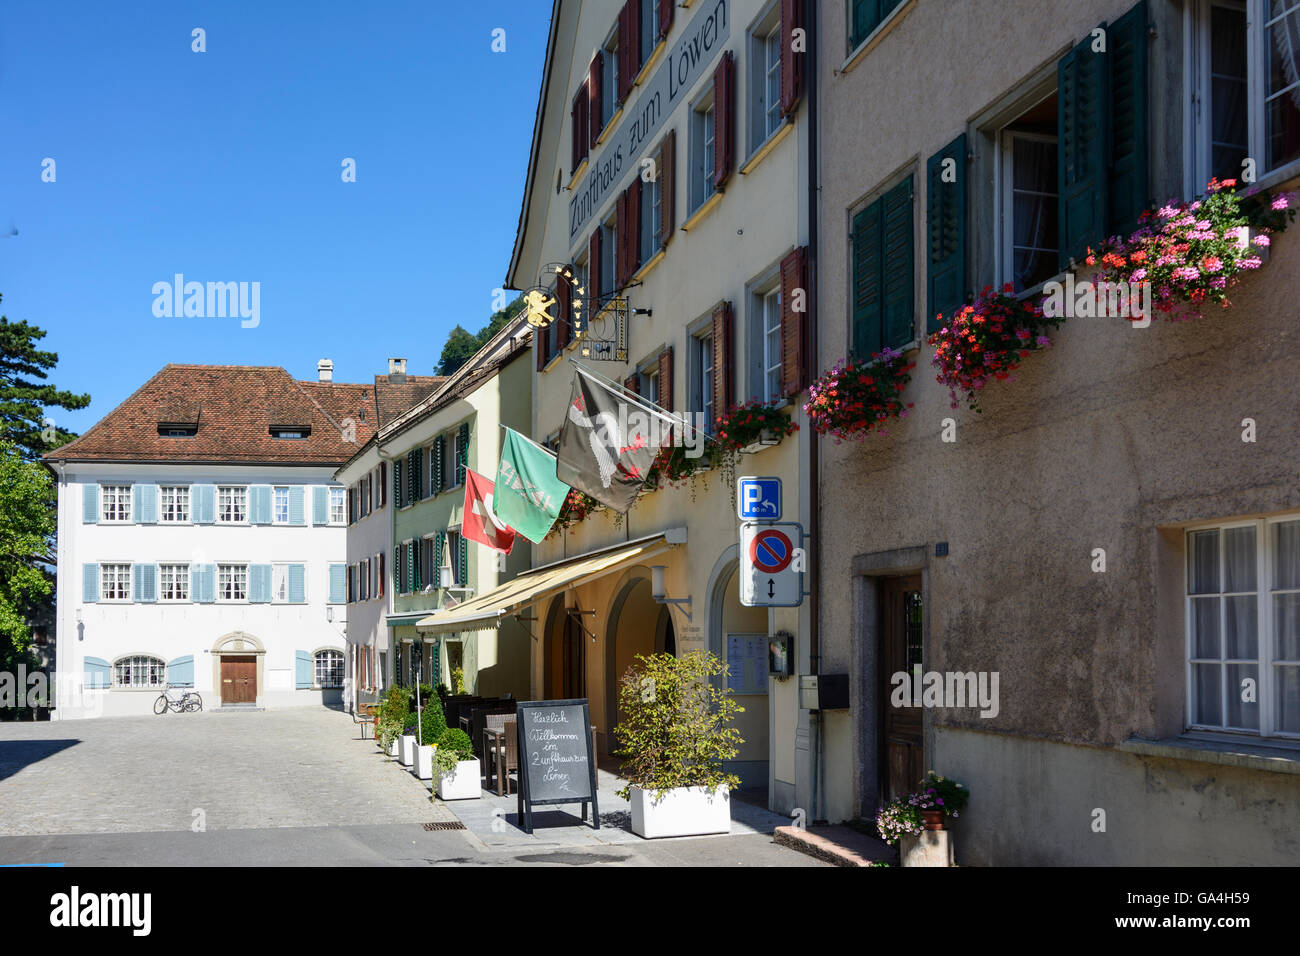 Zum Lowen High Resolution Stock Photography and Images - Alamy